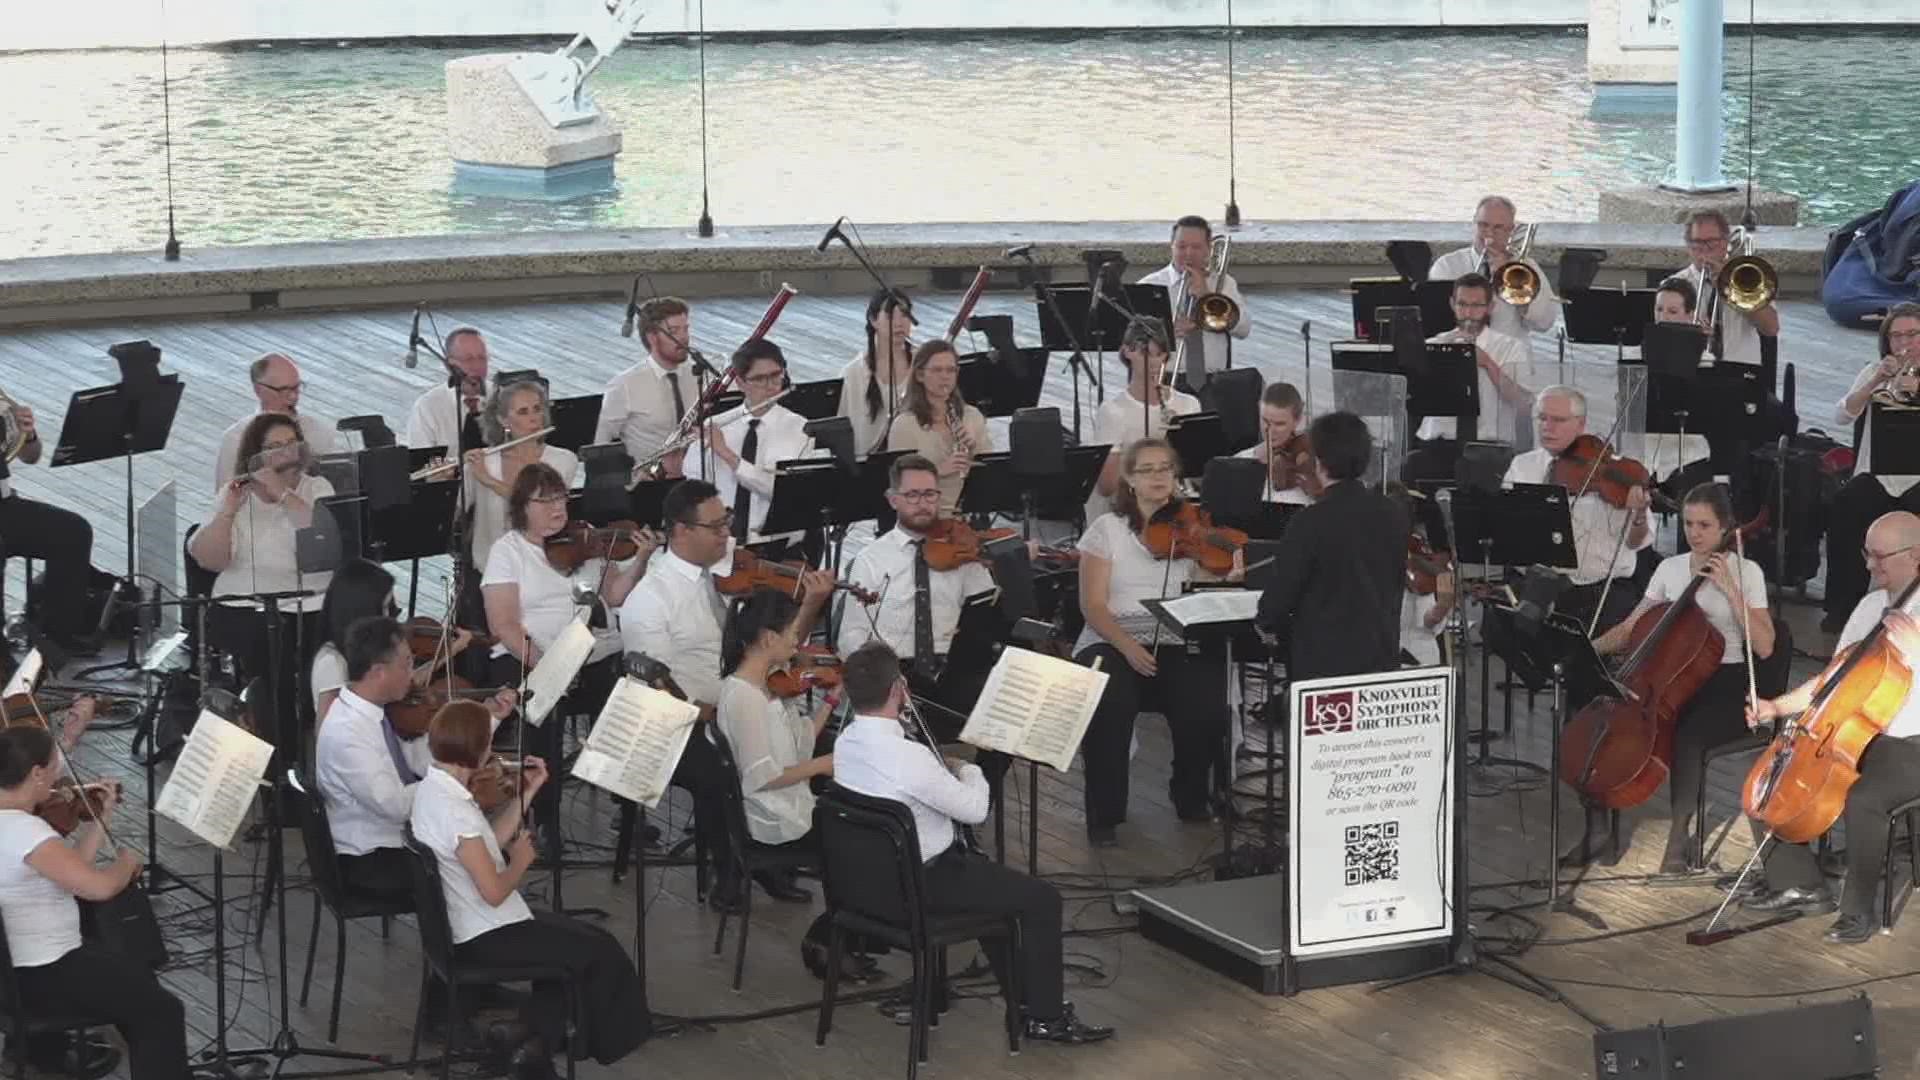 On Thursday, the Knox Symphony Orchestra will honor veterans at the Tennessee Veterans' Home.